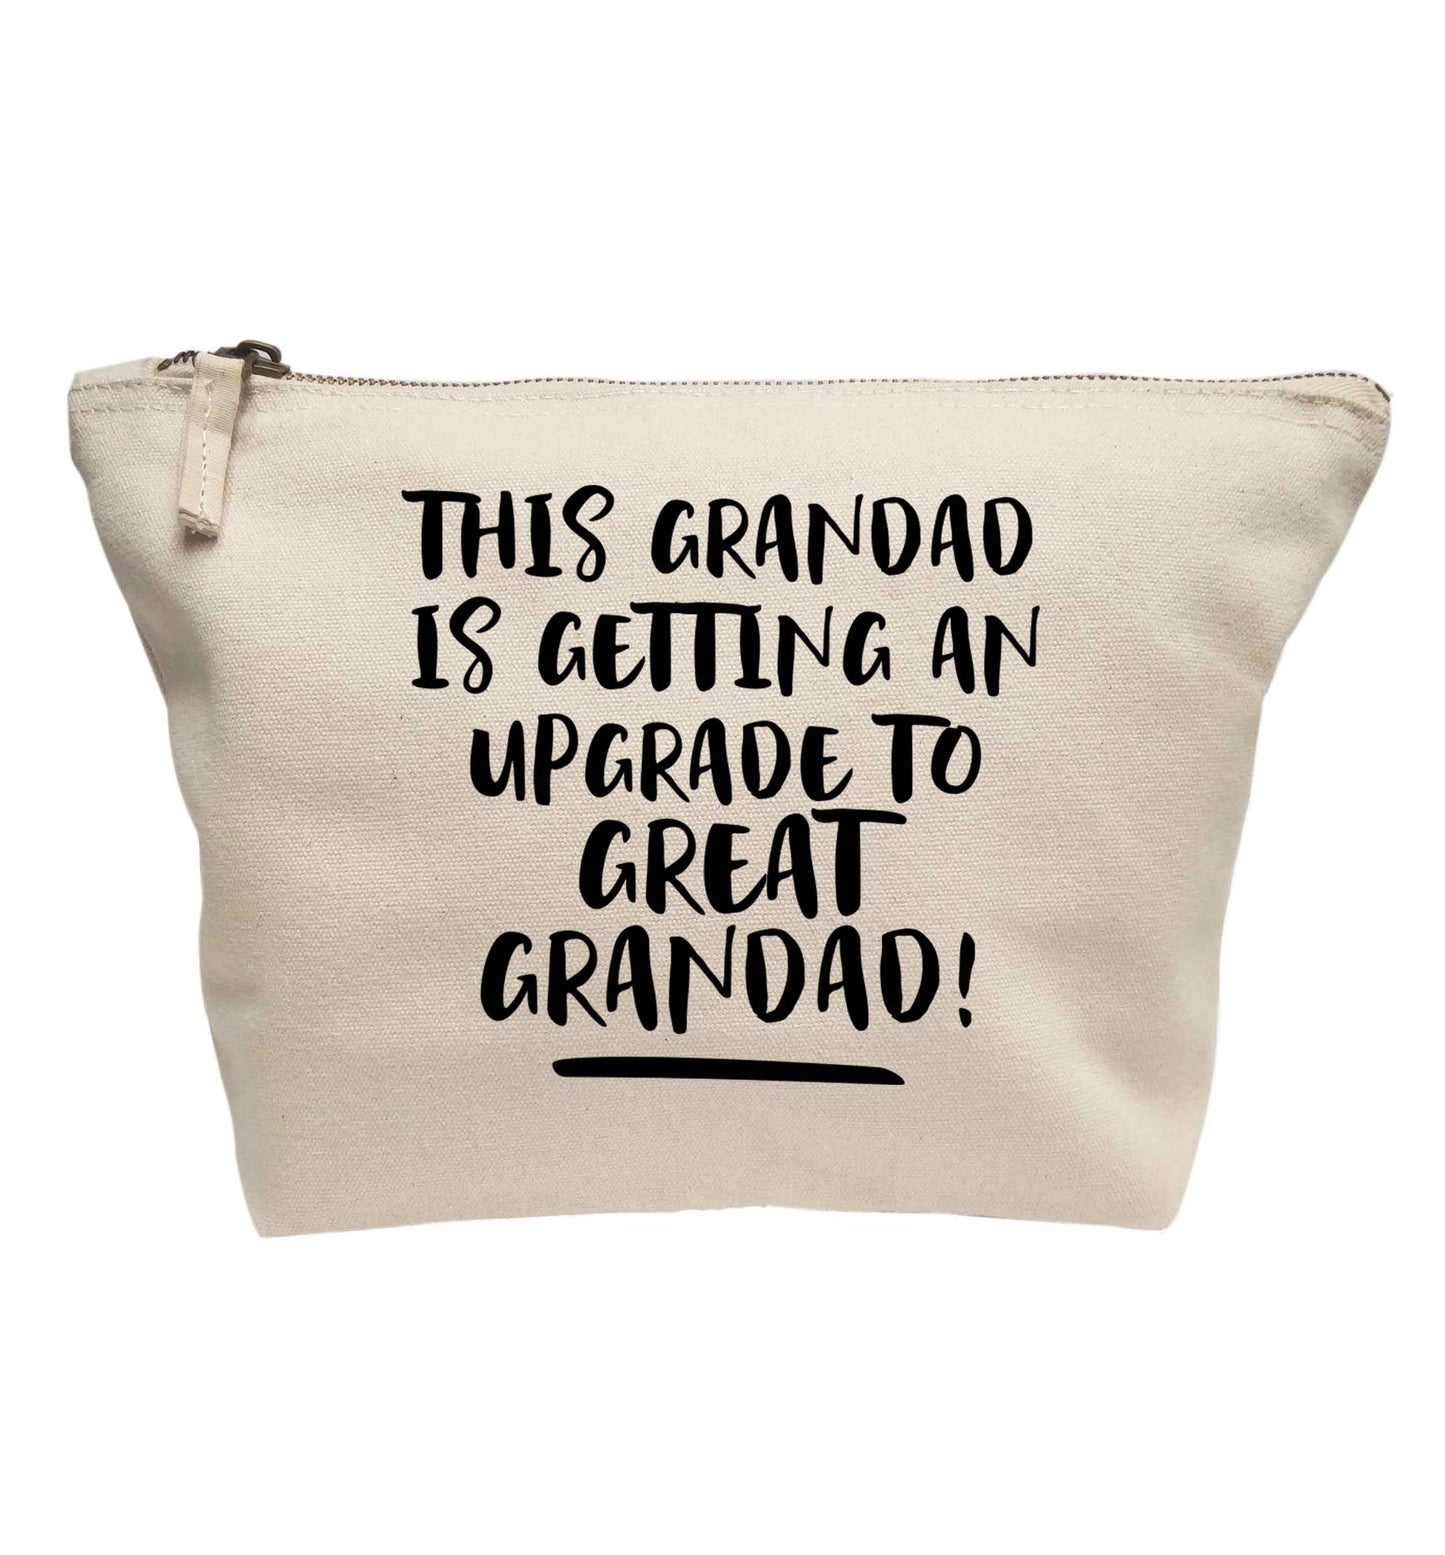 This grandad is getting an upgrade to great grandad! | makeup / wash bag